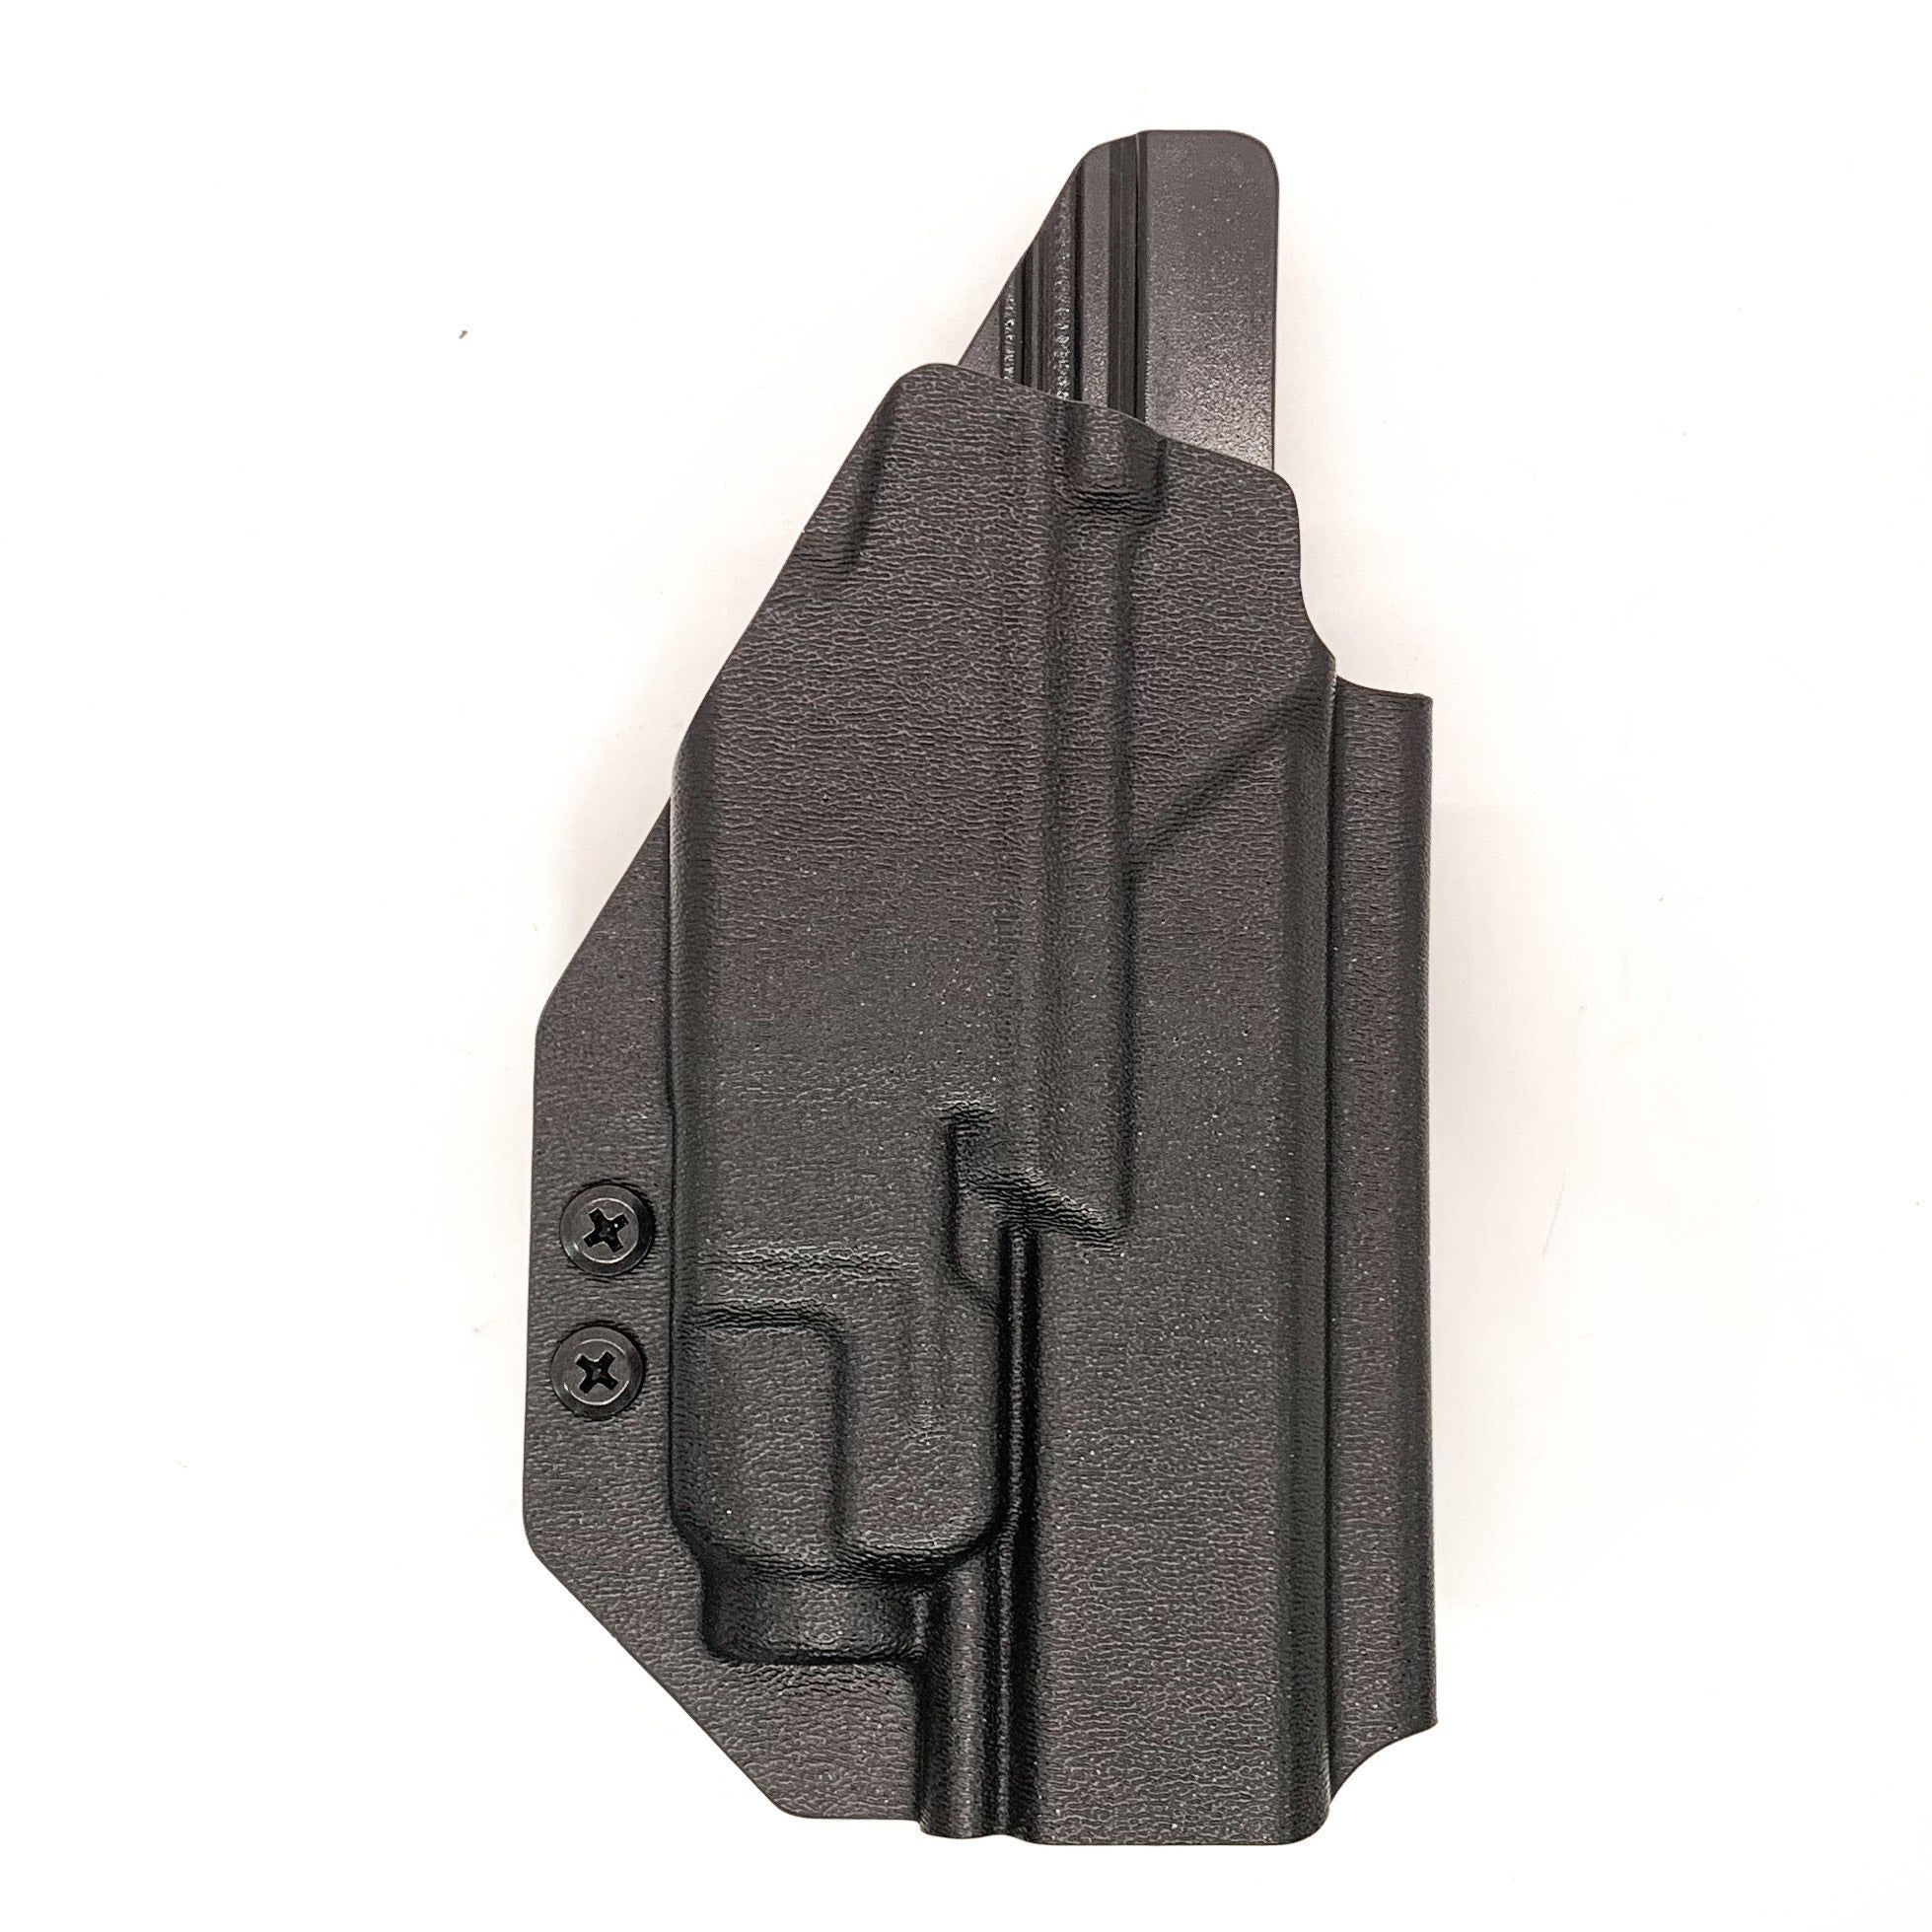 For the best, highest quality, OWB Outside Waistband Holster designed to fit the Springfield Armory Echelon and Streamlight TLR-7A, shop Four Brothers Holters. Cleared for a red dot sight. Full sweat guard, adjustable retention, minimal material, and smooth edges to reduce printing. Proudly made in the USA.